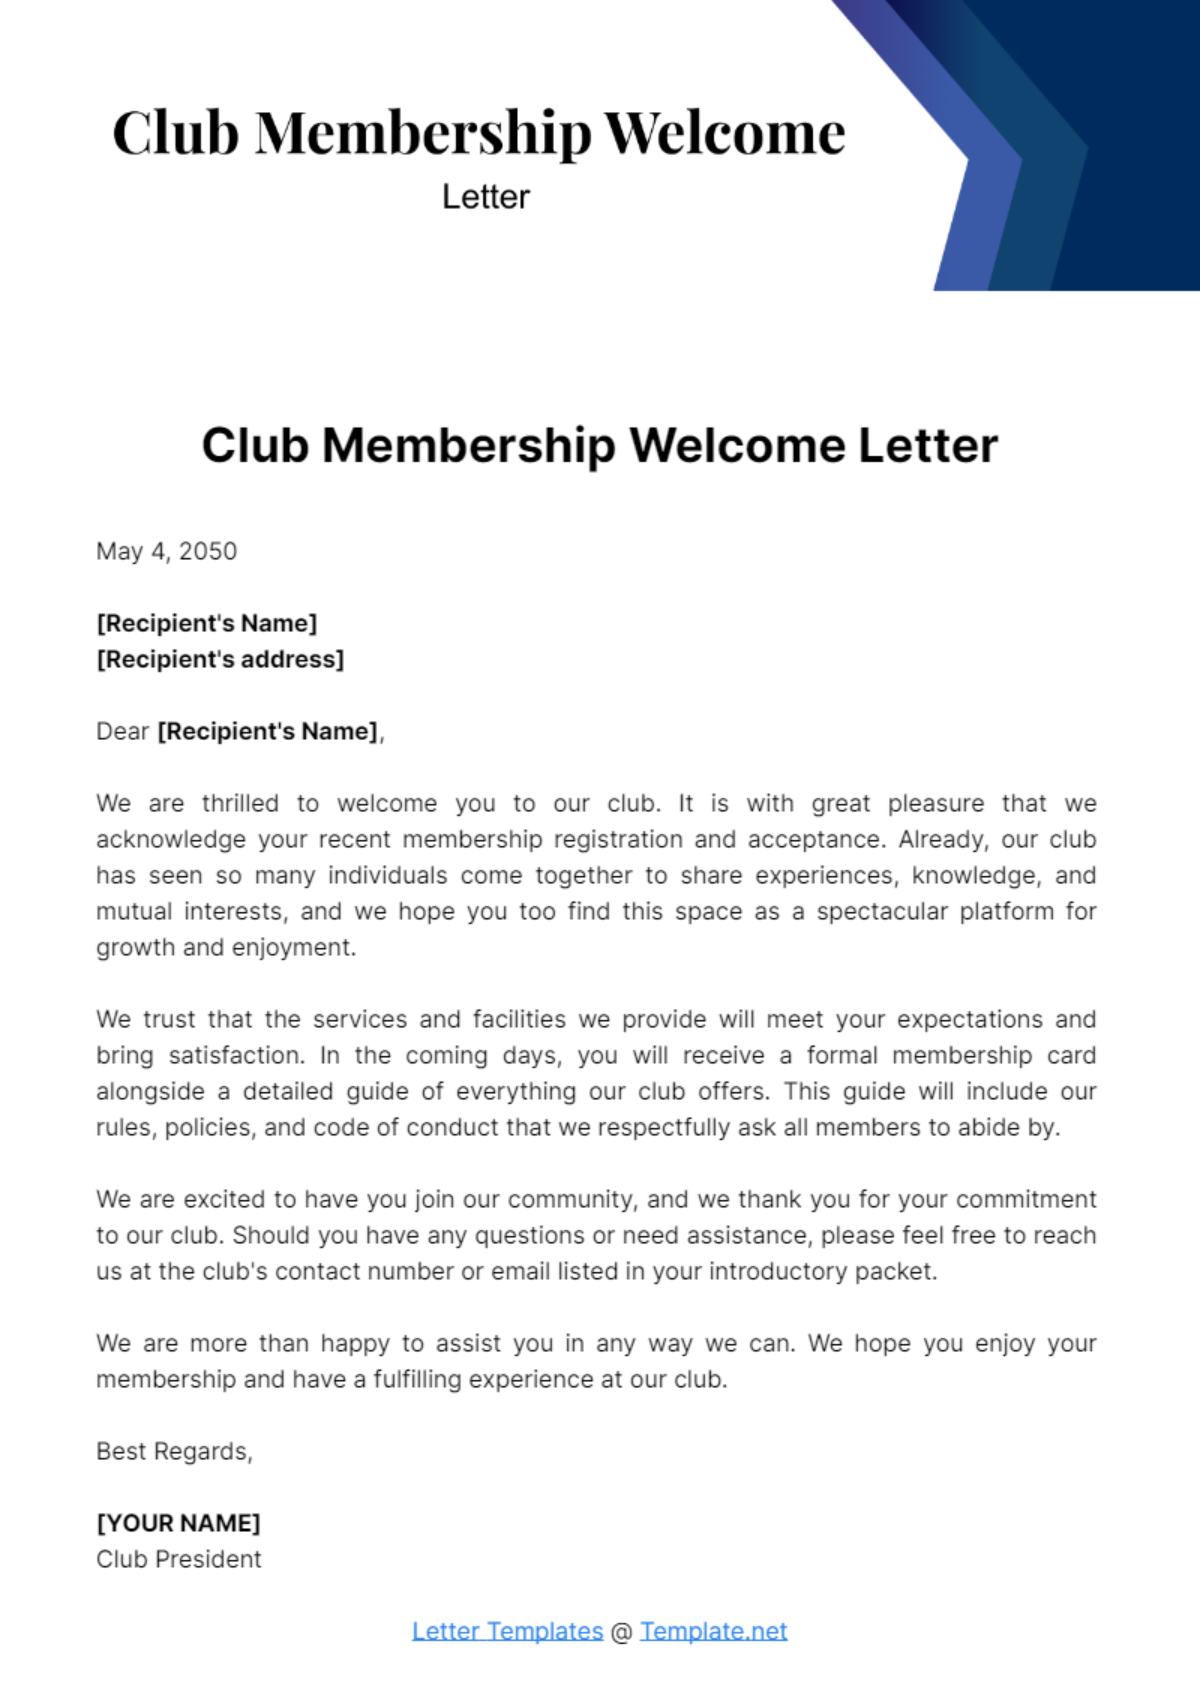 Free Club Membership Welcome Letter Template